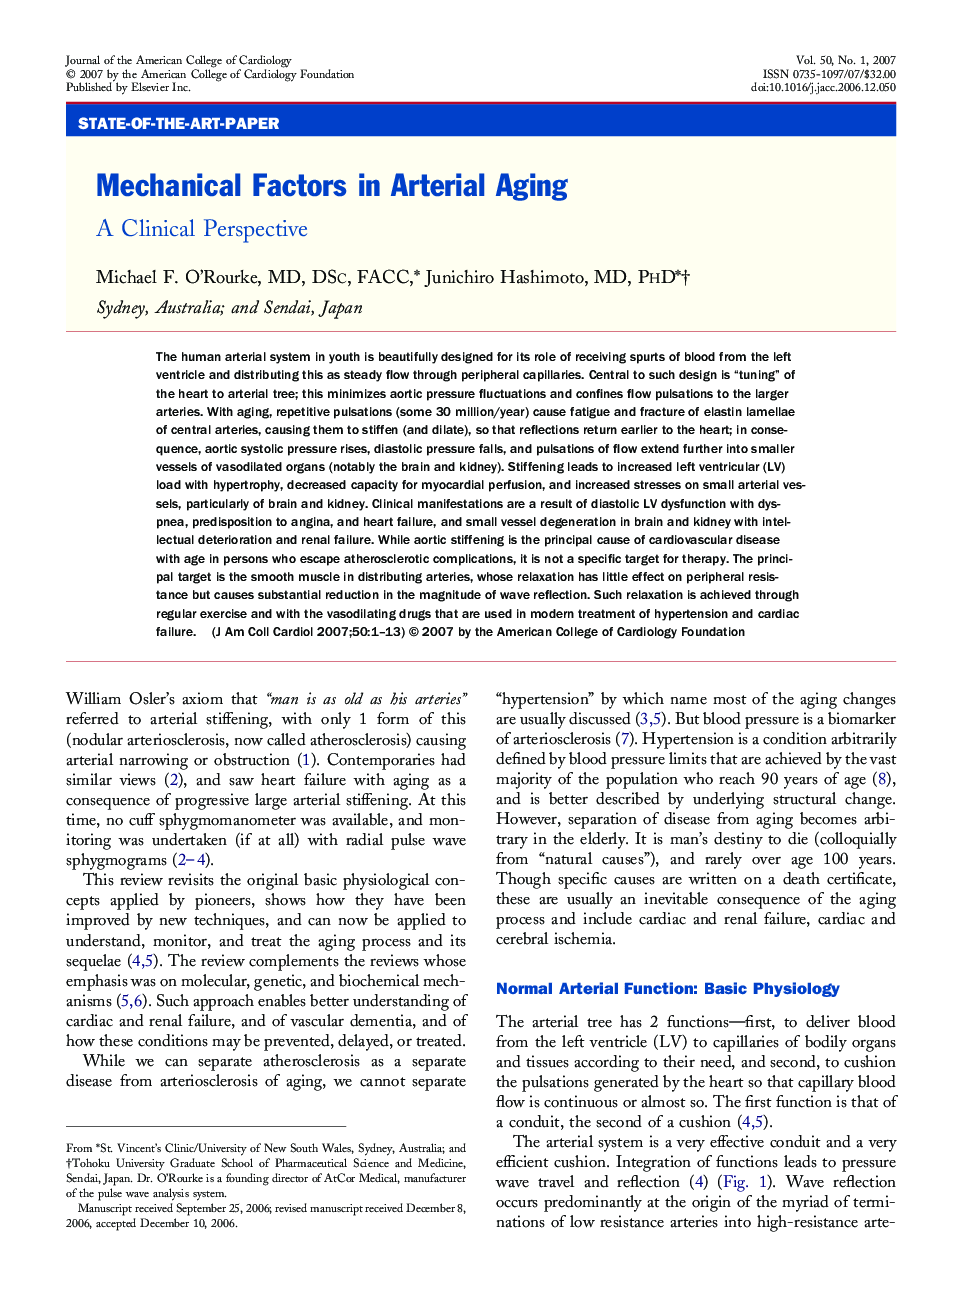 Mechanical Factors in Arterial Aging: A Clinical Perspective